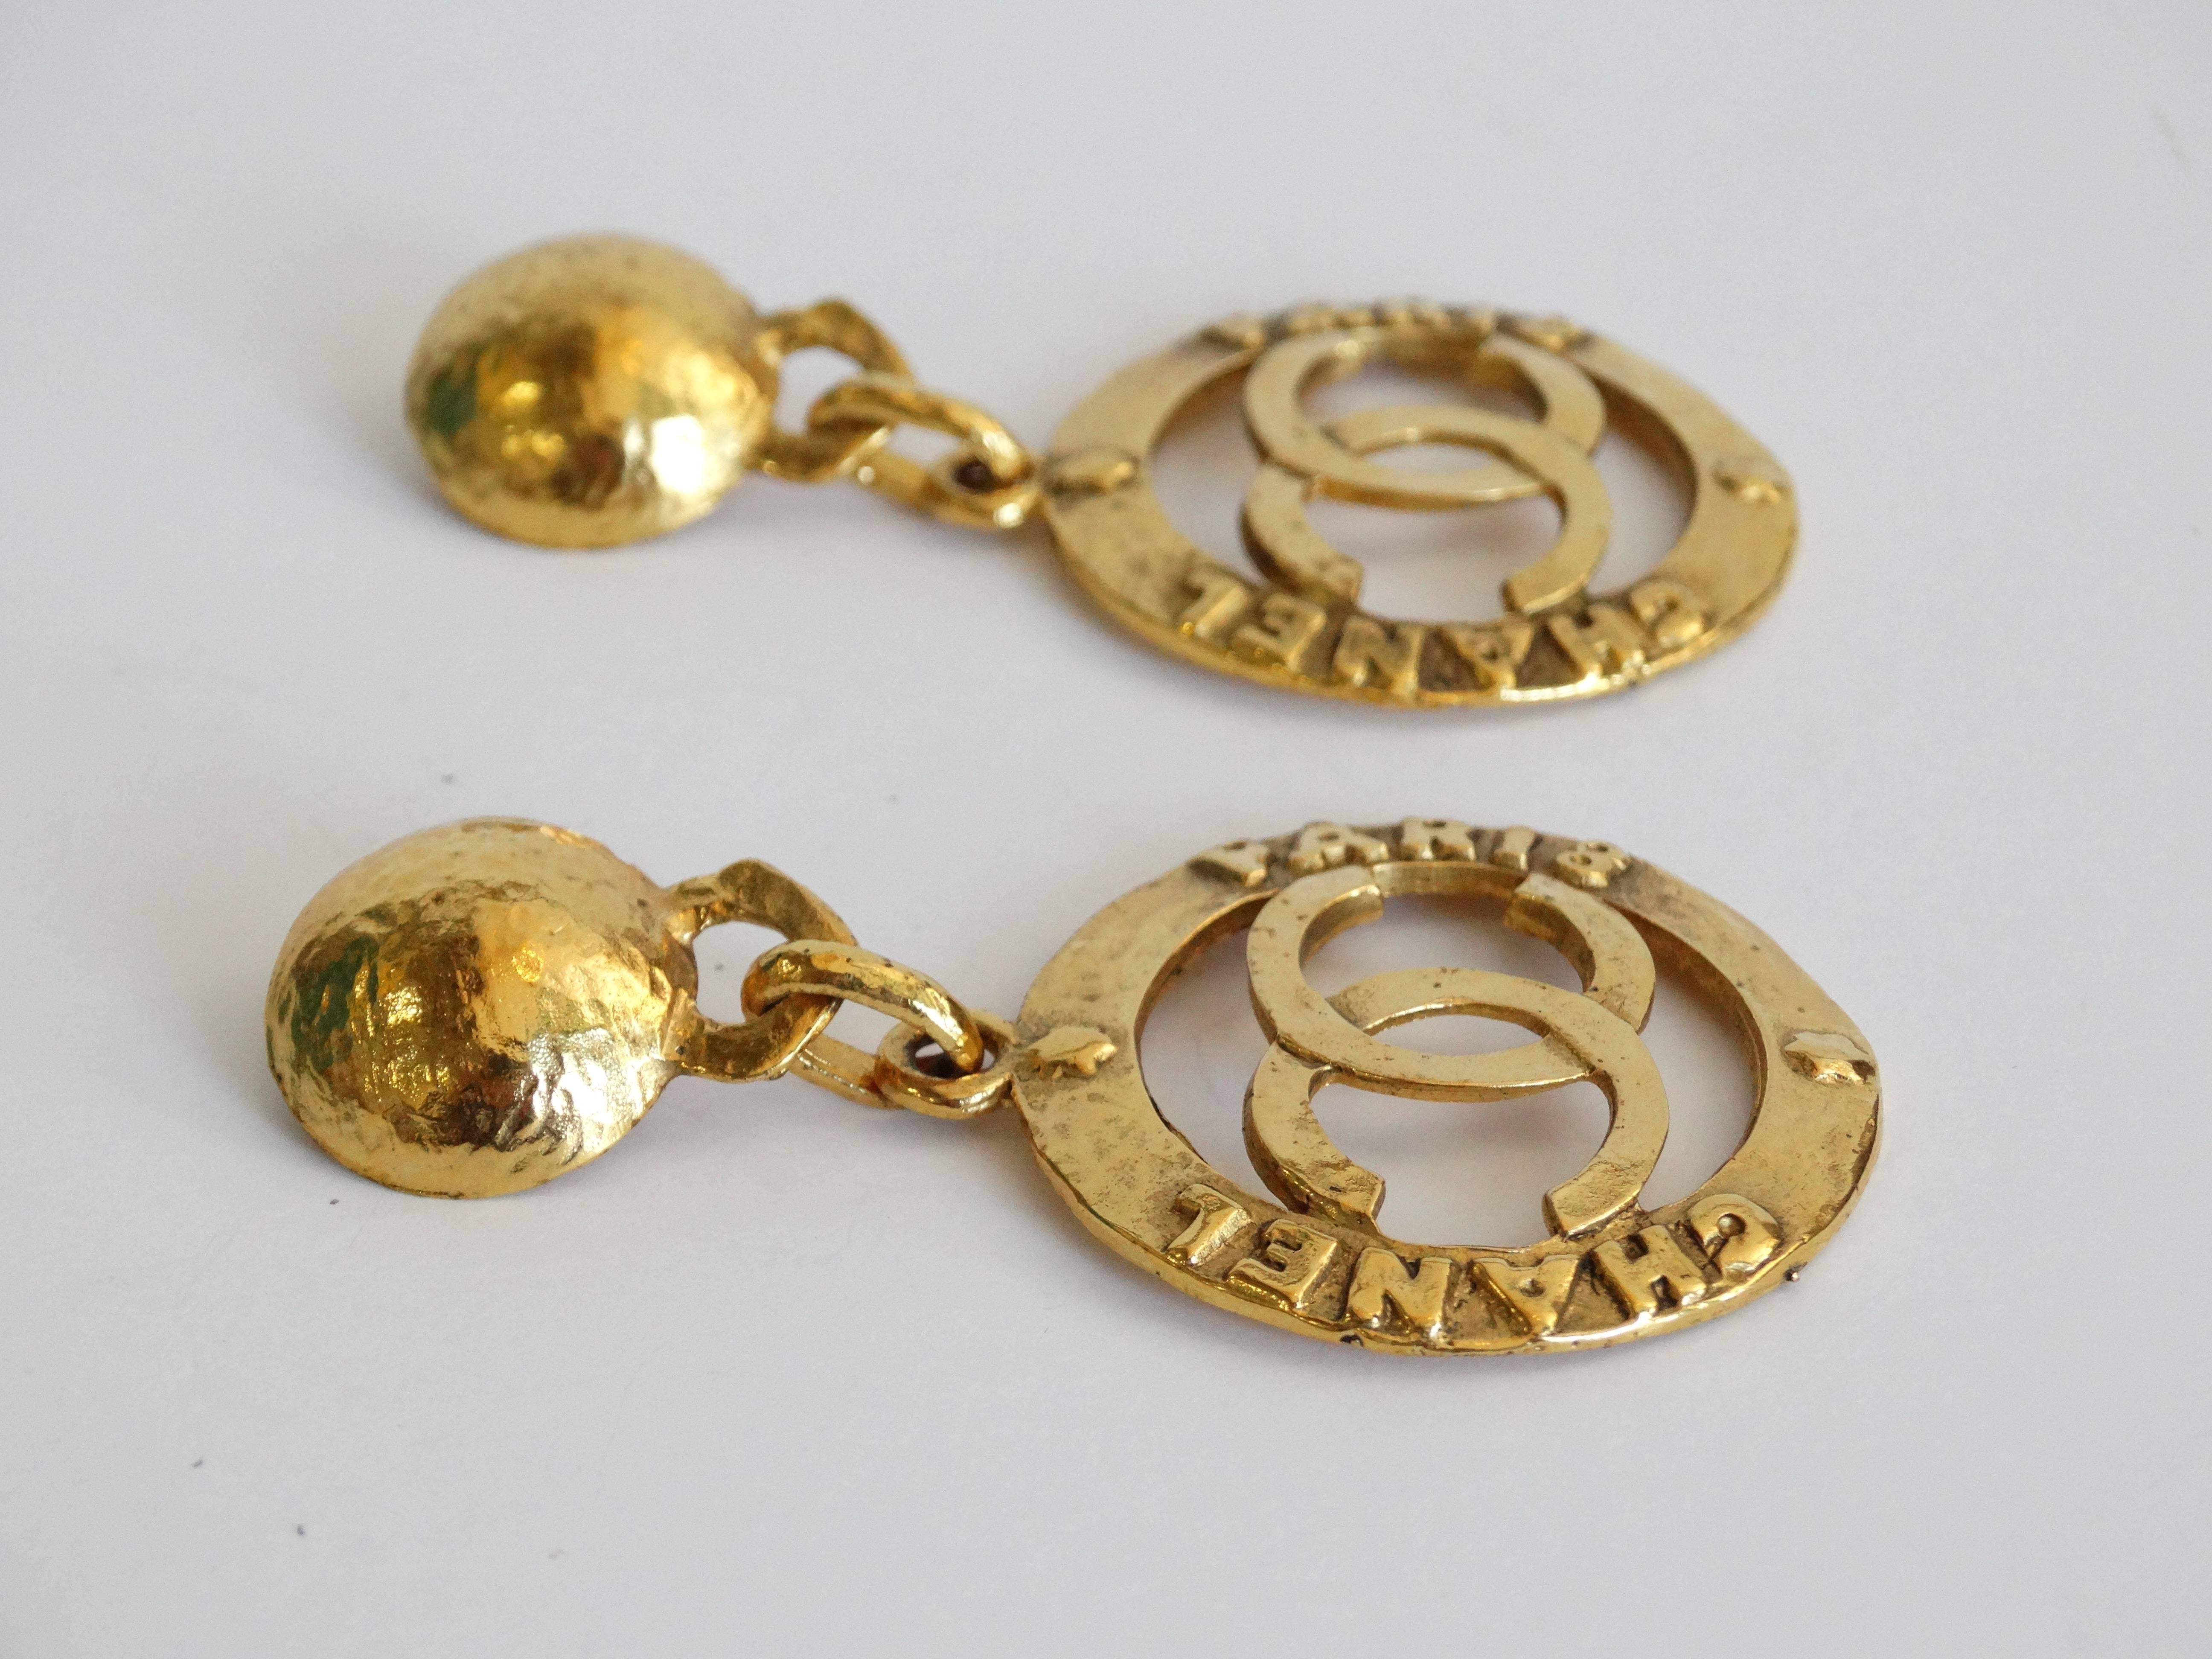 Karl Lagerfeld for CHANEL very rare heavily 18kt gold-plated large two-inch hoops. The earrings are positively stellar, huge hoops typical of Lagerfeld's over the top genius, with particular attention to details and workmanship...raised (embossed)